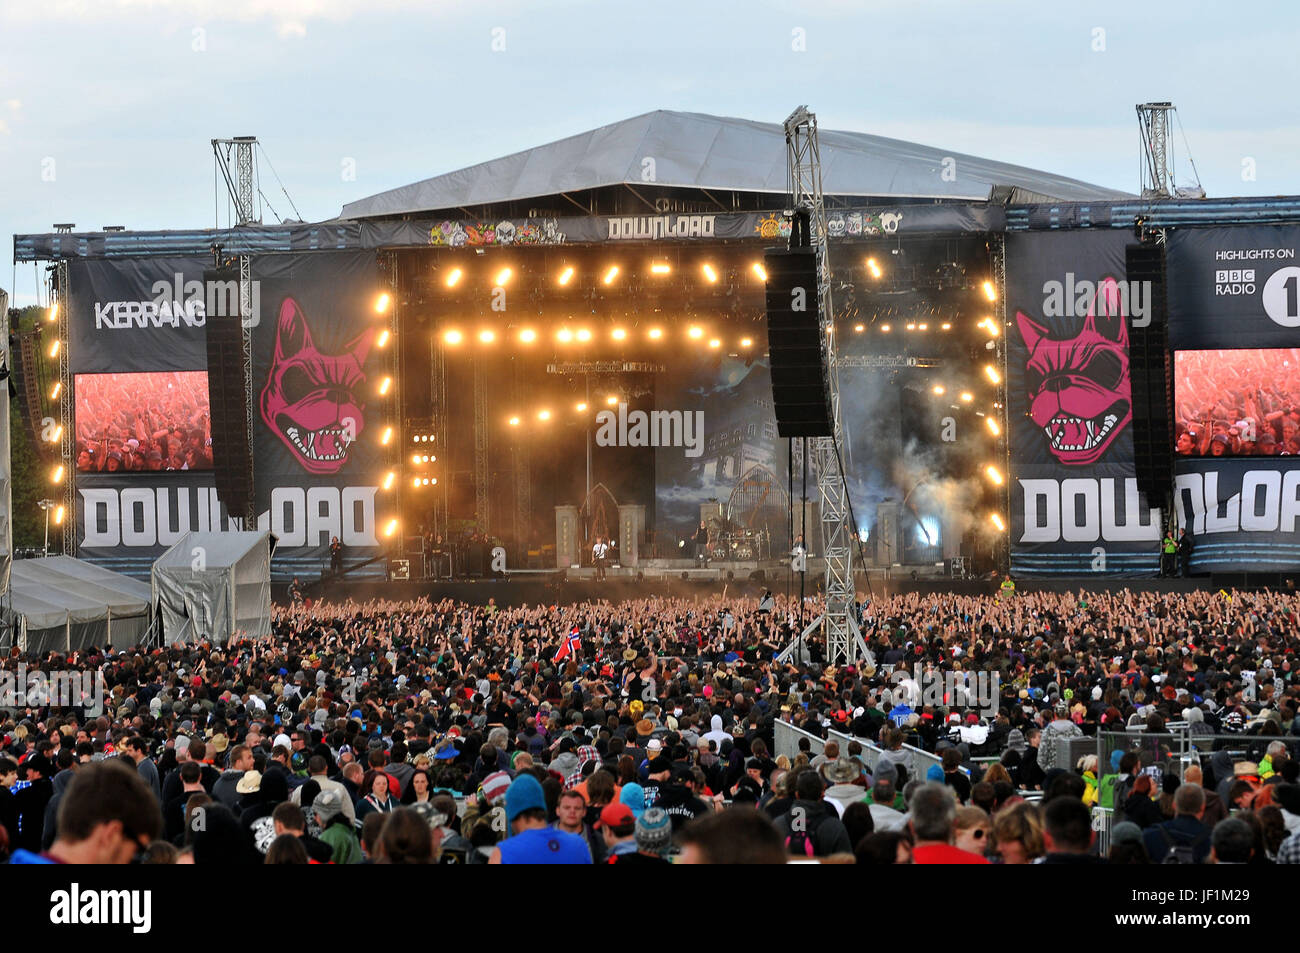 Download Festival - crowds and atmosphere in front of the main stage at ...